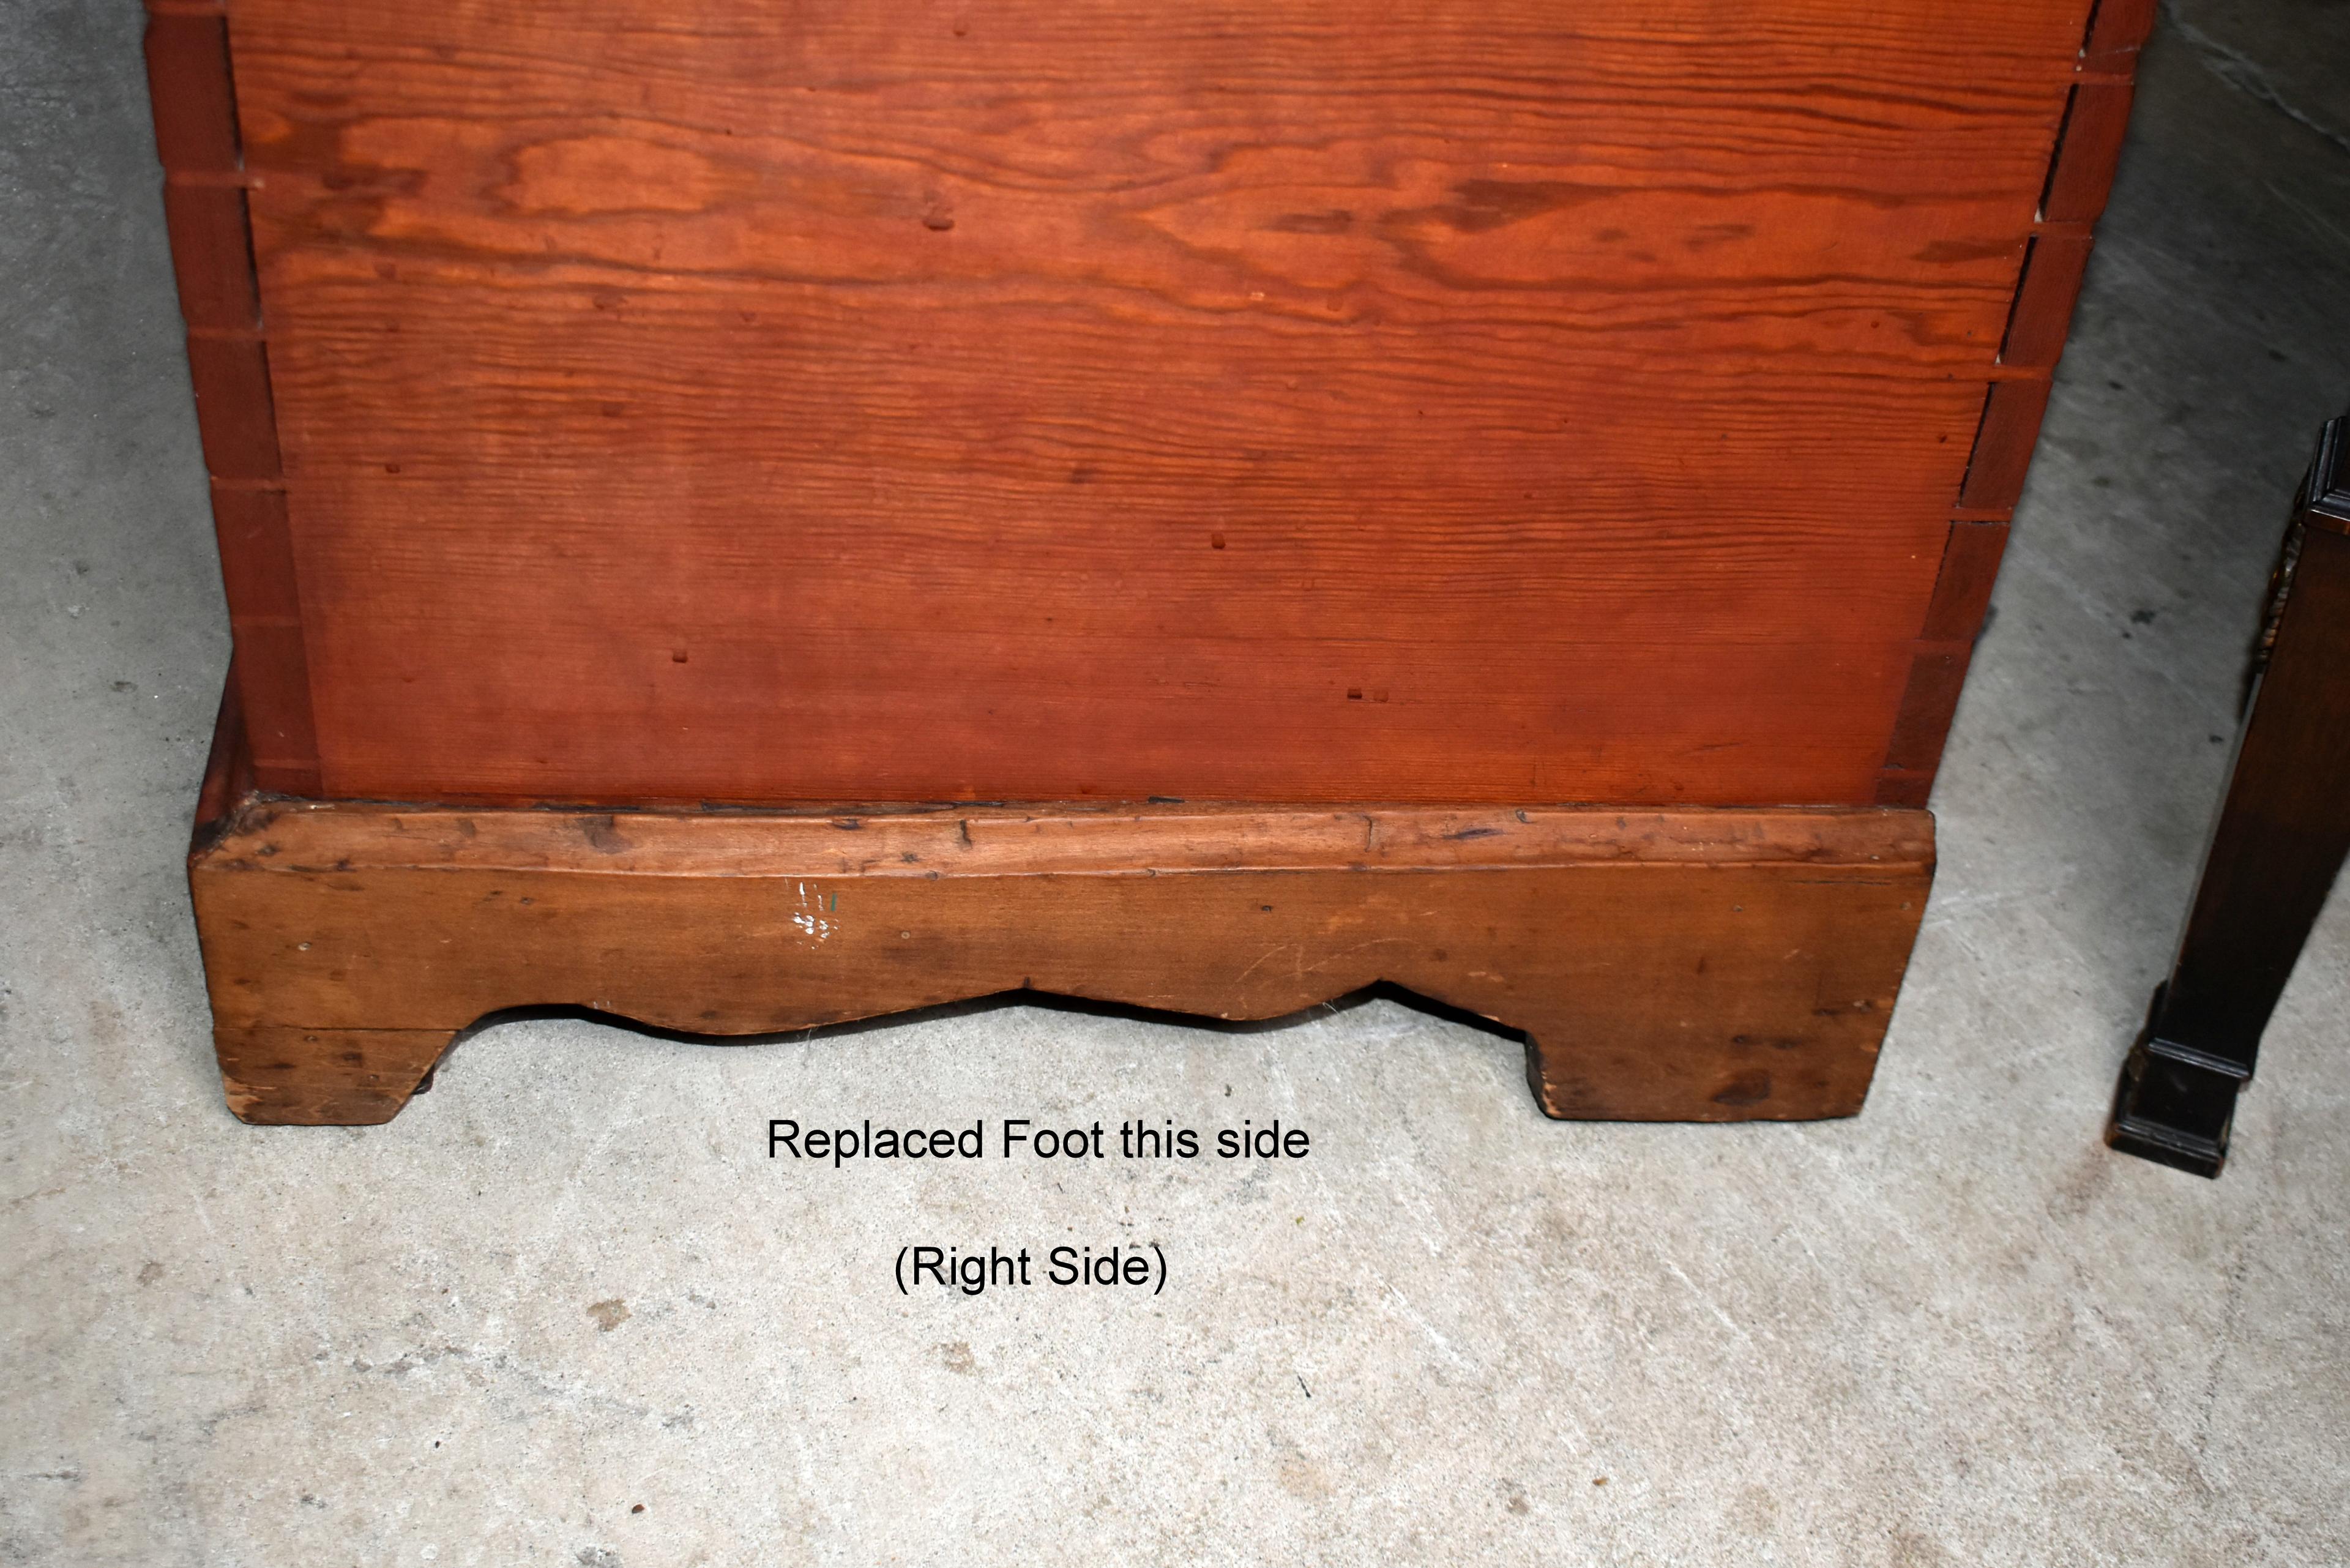 Beautiful Southern Heart Pine Blanket Chest, 19th C., Hand Forged Strap Hinges, Red Stain Finish